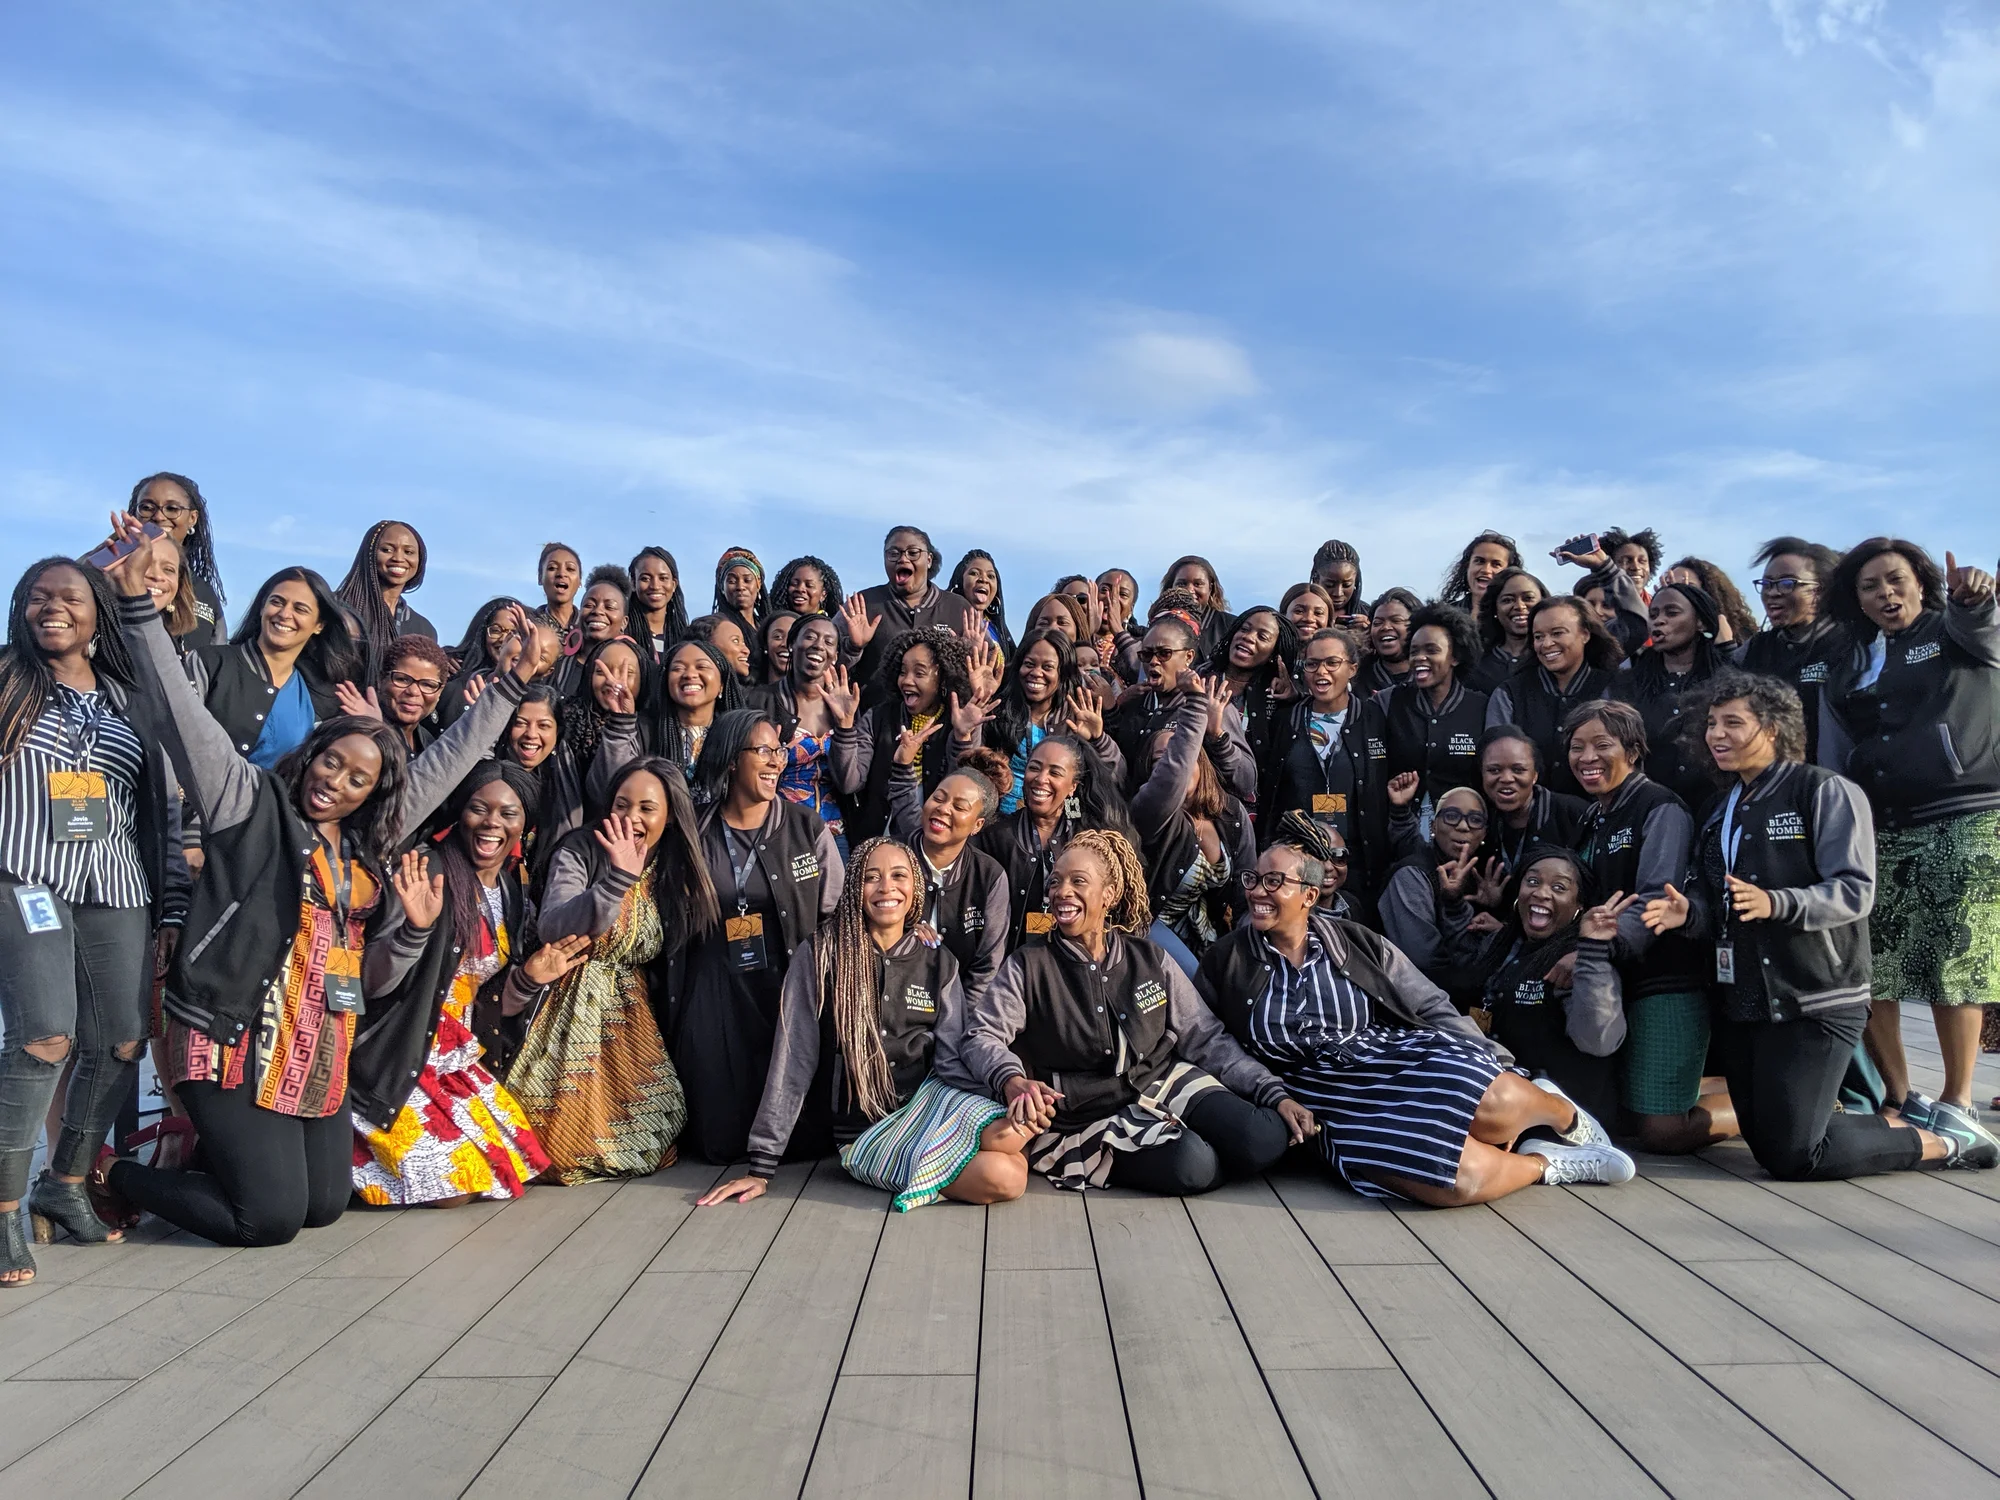 A group of Googlers, all women, bunched together waving, or showing piece signs for a large group photo